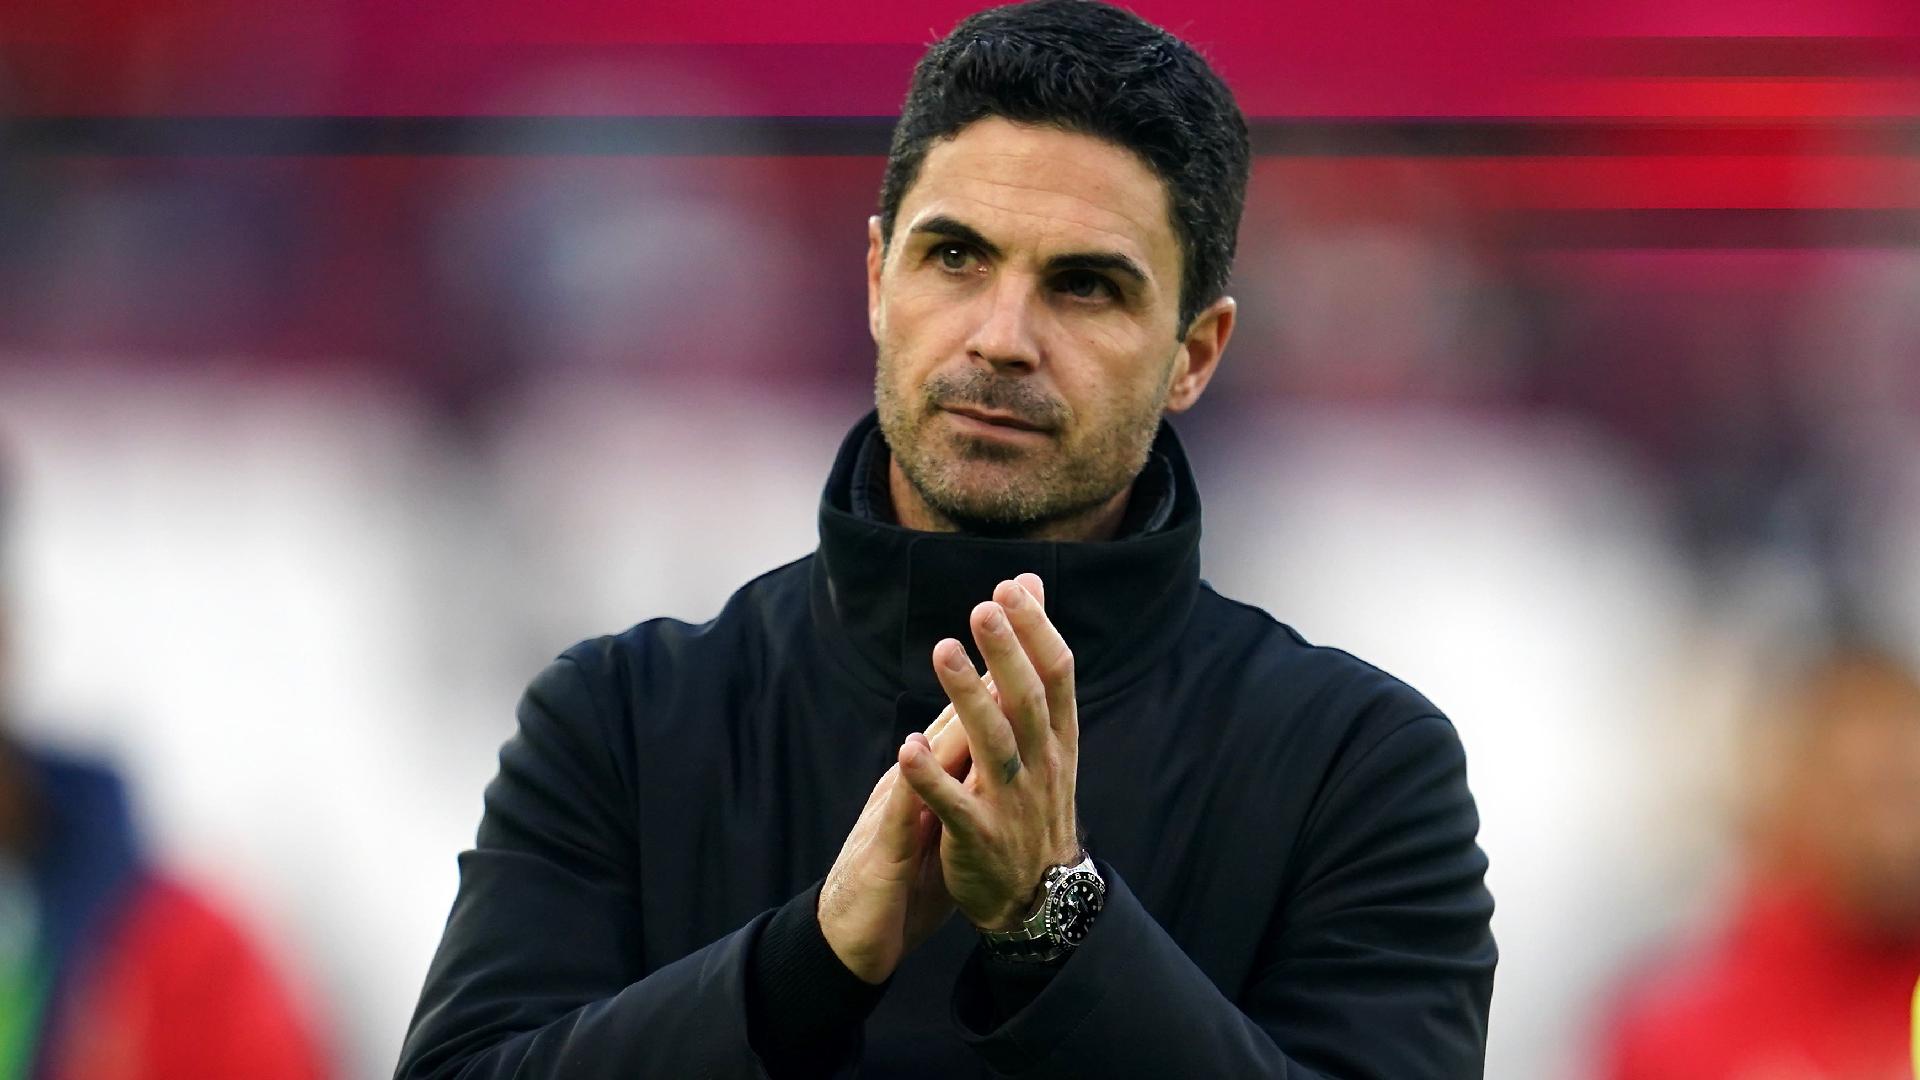 Mikel Arteta has ‘no clue’ how many points Arsenal might need to win title